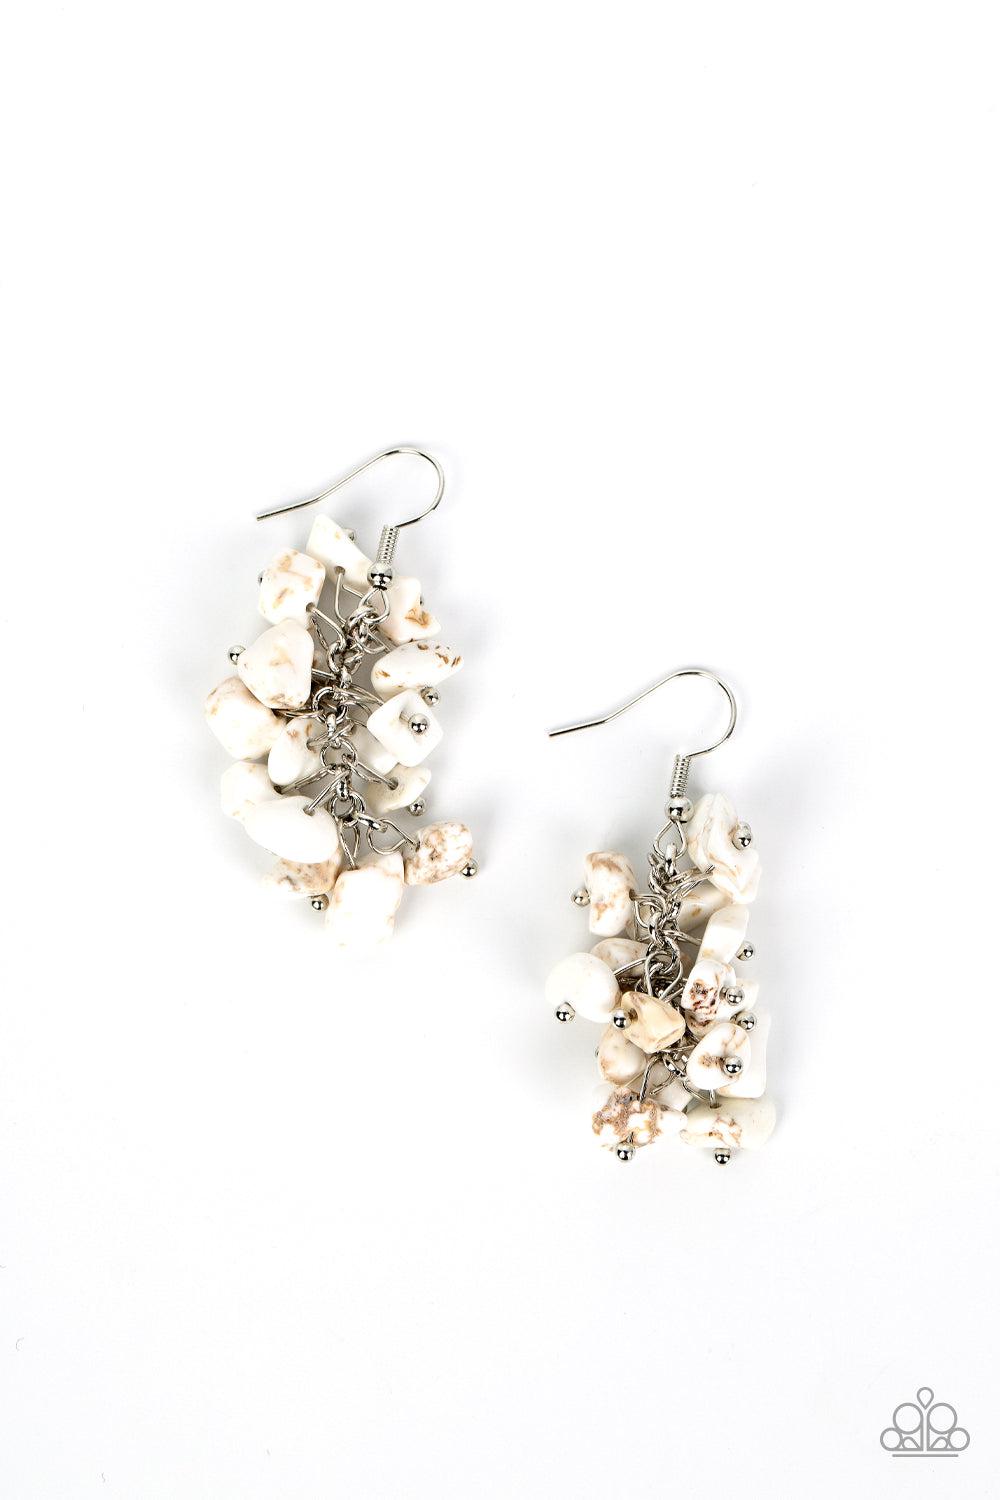 Pebble Palette White Stone Earrings - Paparazzi Accessories- lightbox - CarasShop.com - $5 Jewelry by Cara Jewels